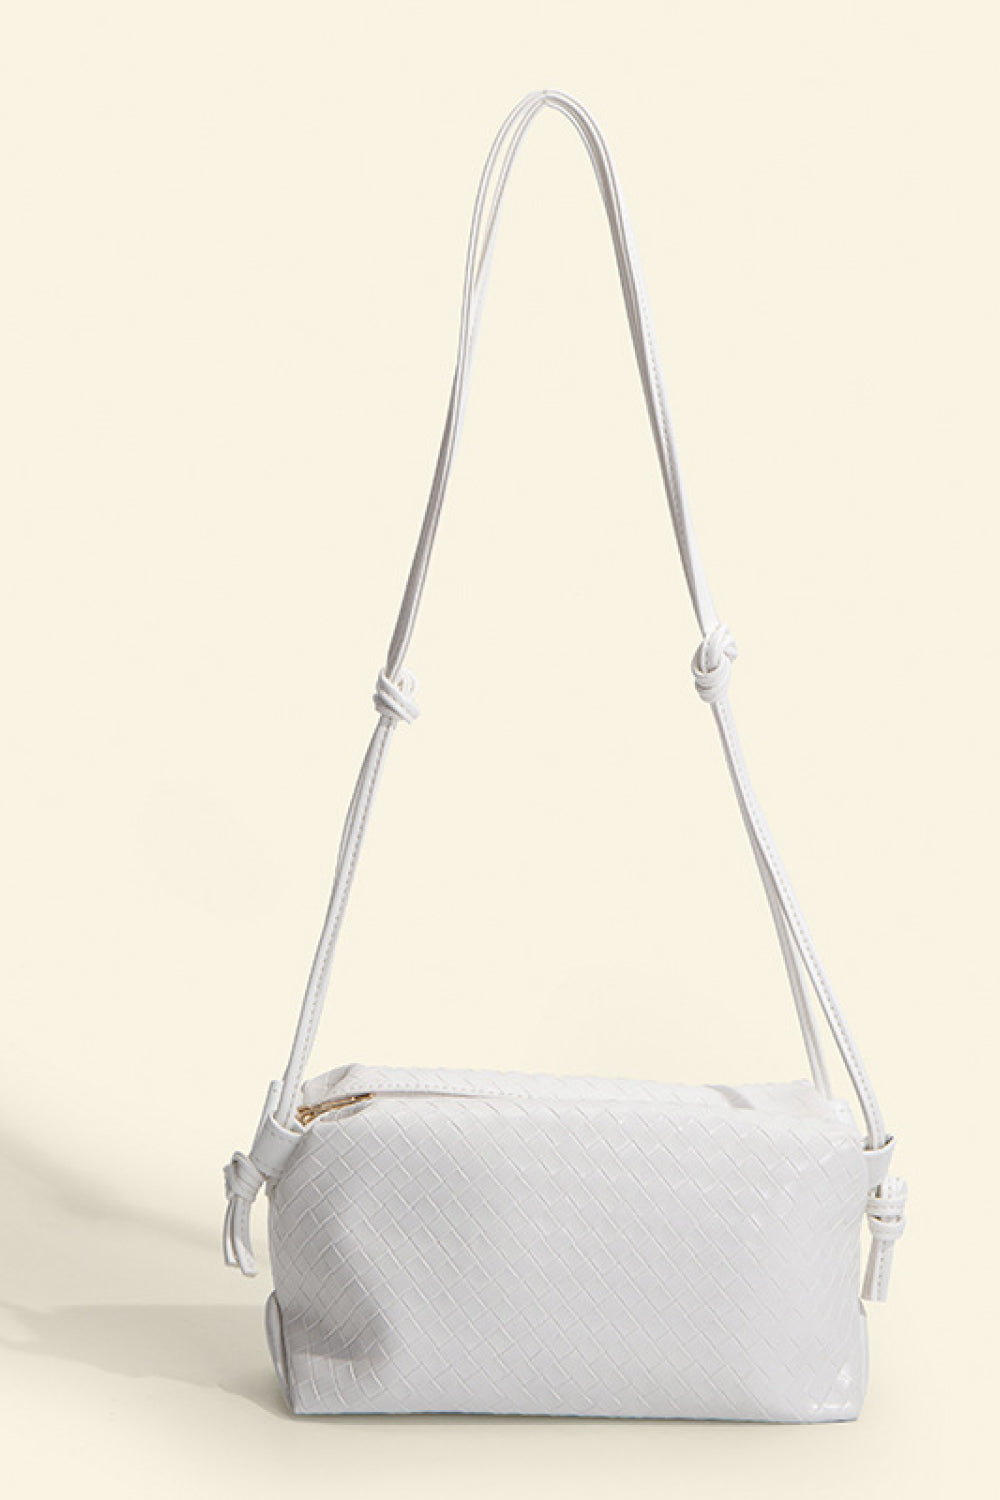 PU Leather Knot Detail Shoulder Bag White One Size